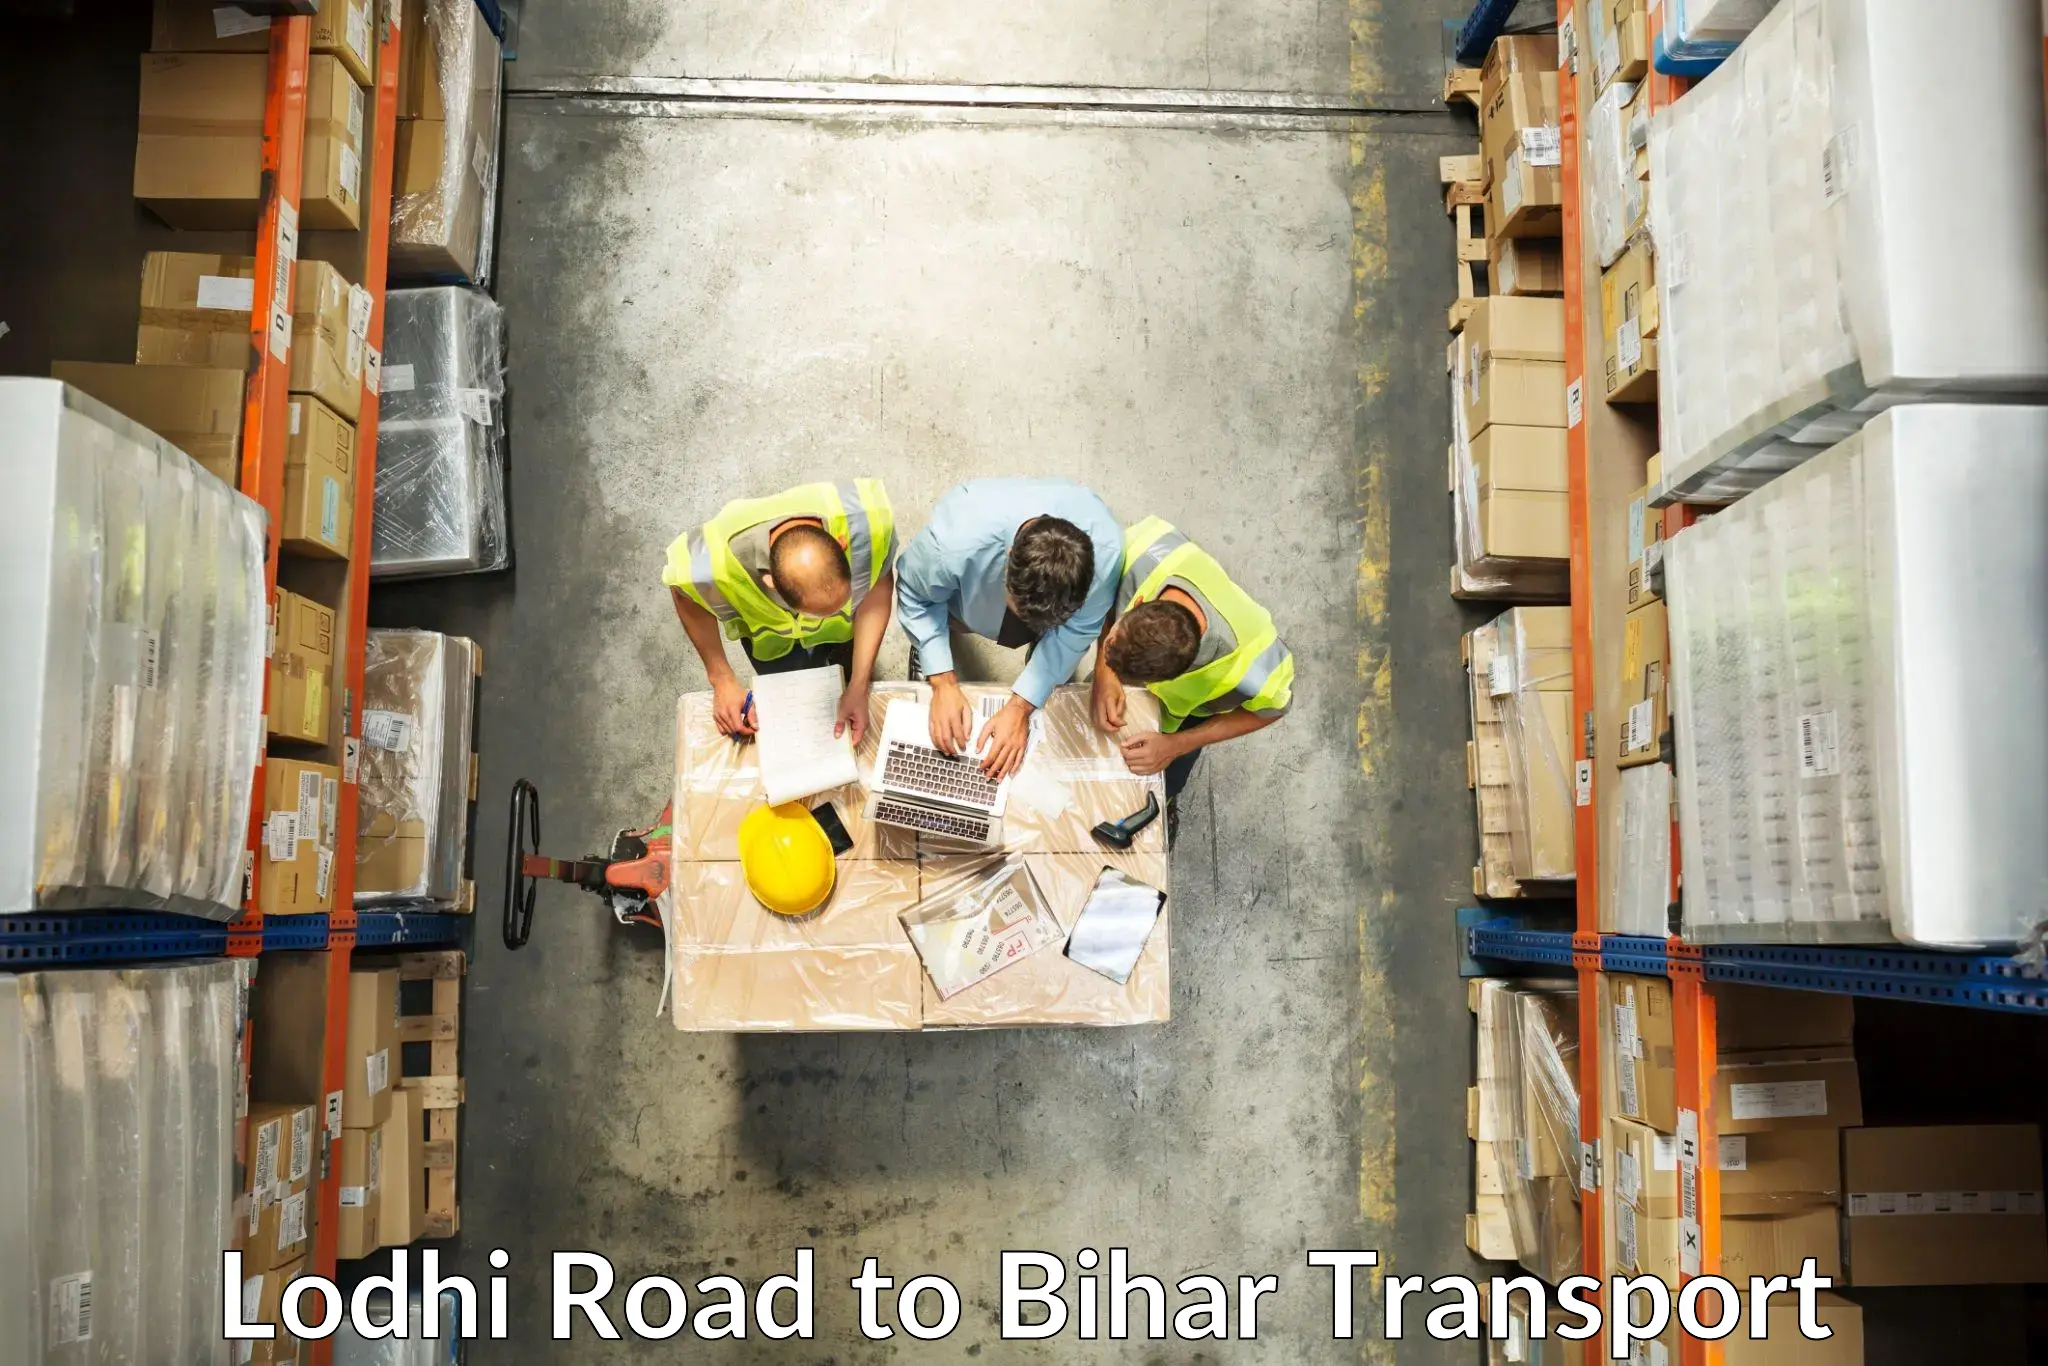 Goods delivery service Lodhi Road to Maheshkhunt